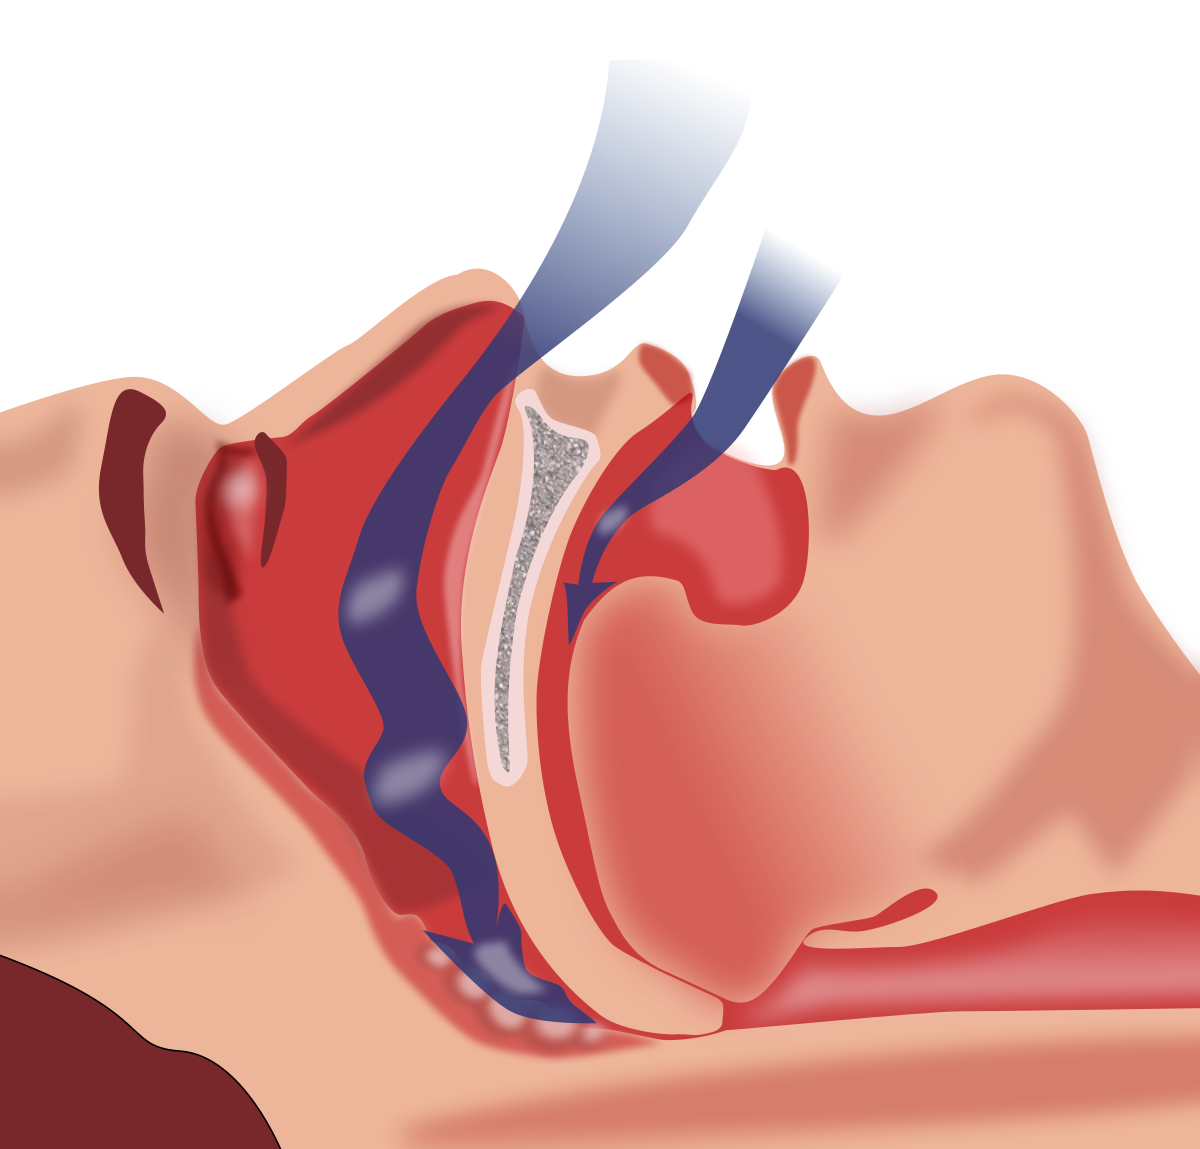 Surgical referral of obstructive sleep apnea patients- AASM Guidelines